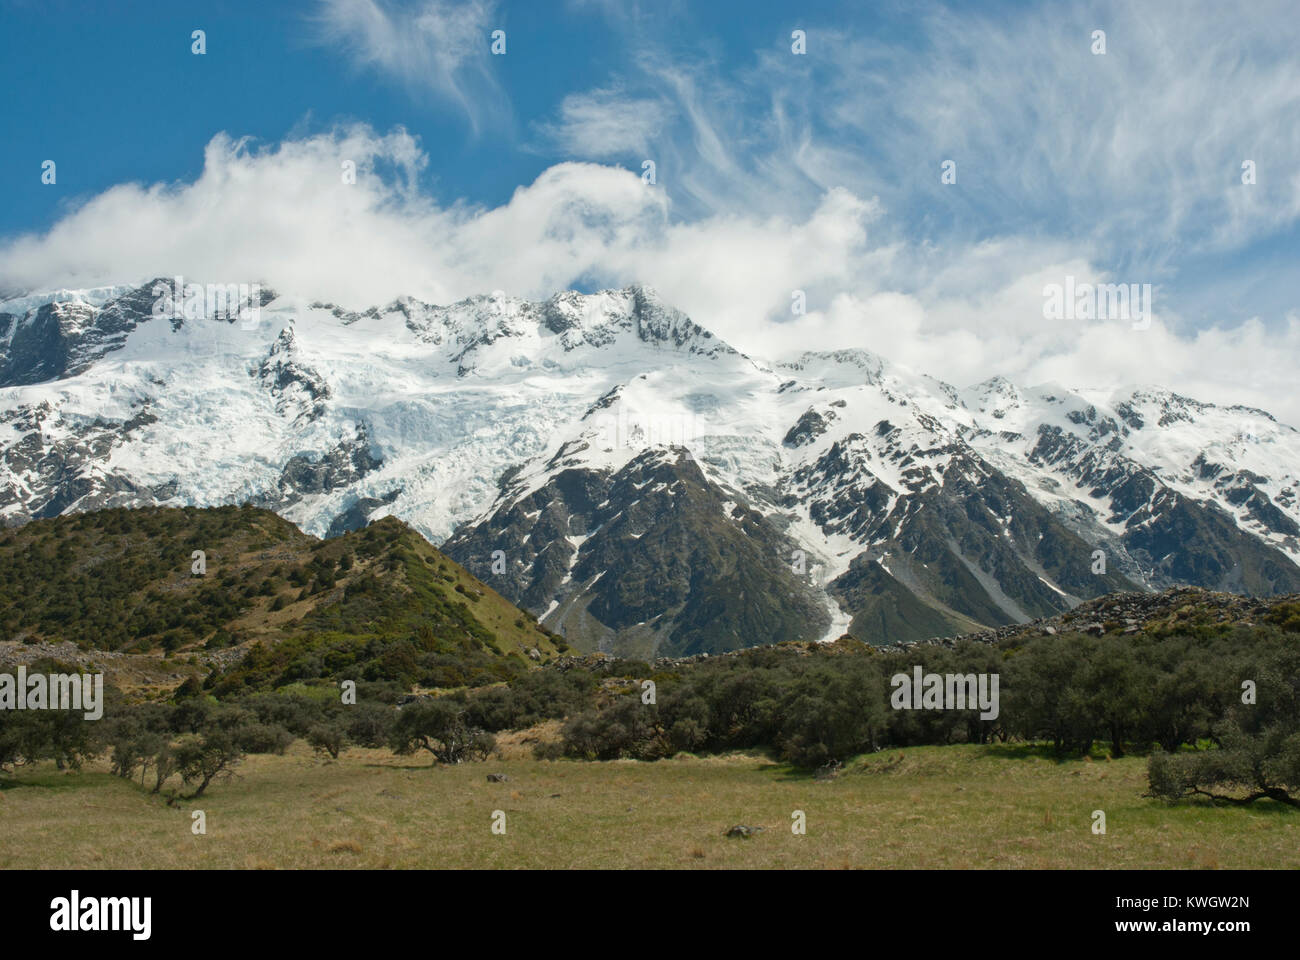 Stunning Hooker Valley in Southern Alps, snow capped Mount Sefton and range, an avalanche of snow, whispy clouds against blue sky. Spring/summer. Stock Photo